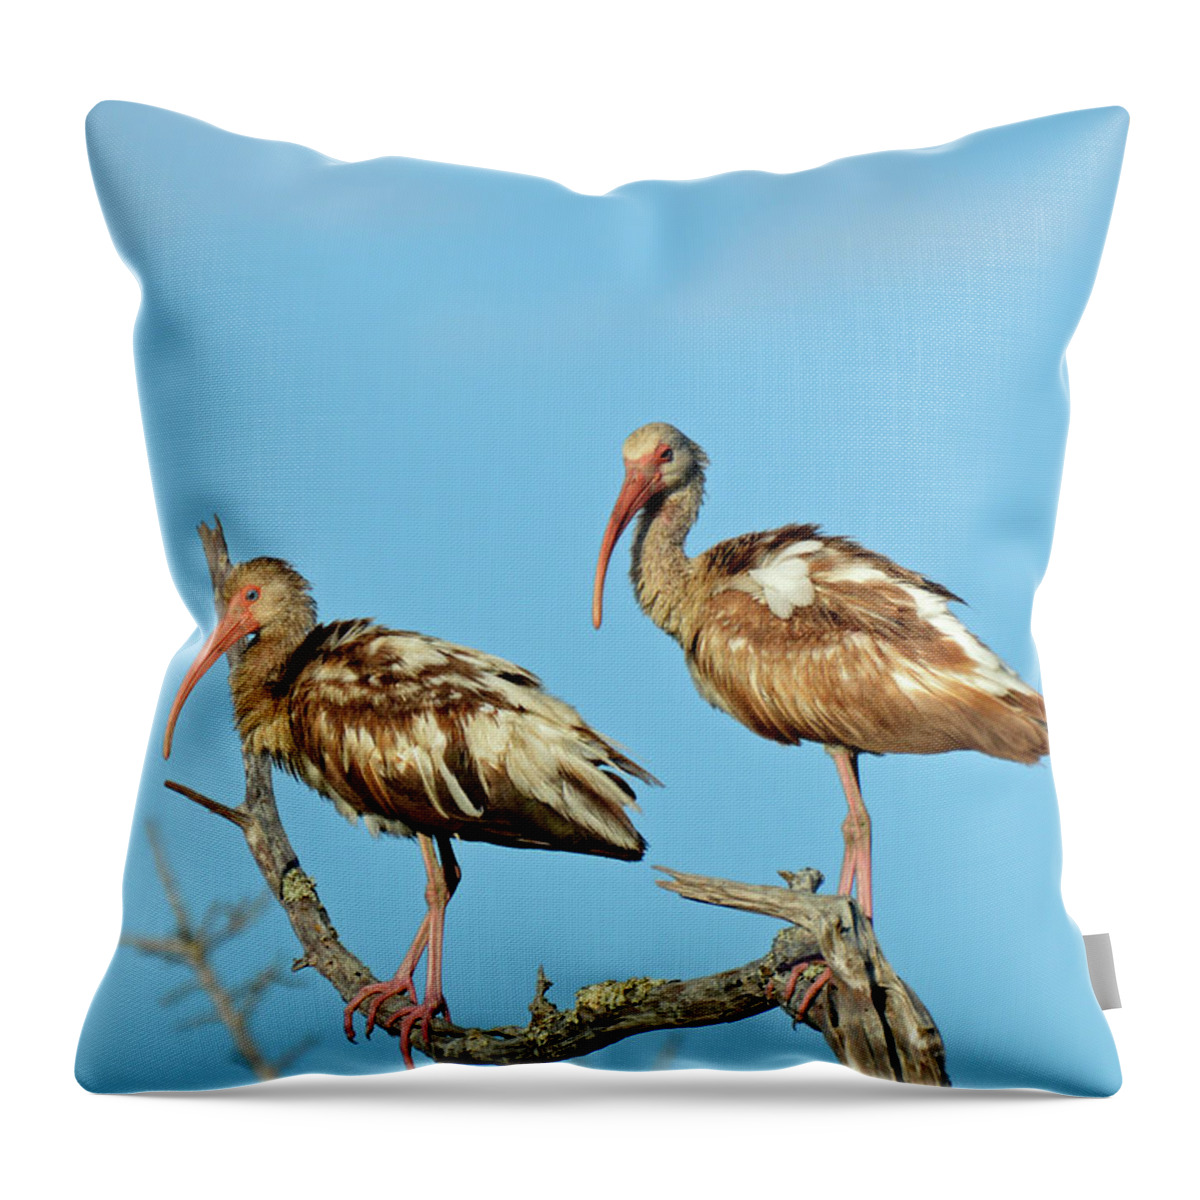 Jekyll Island Throw Pillow featuring the photograph Perched White Ibises by Bruce Gourley